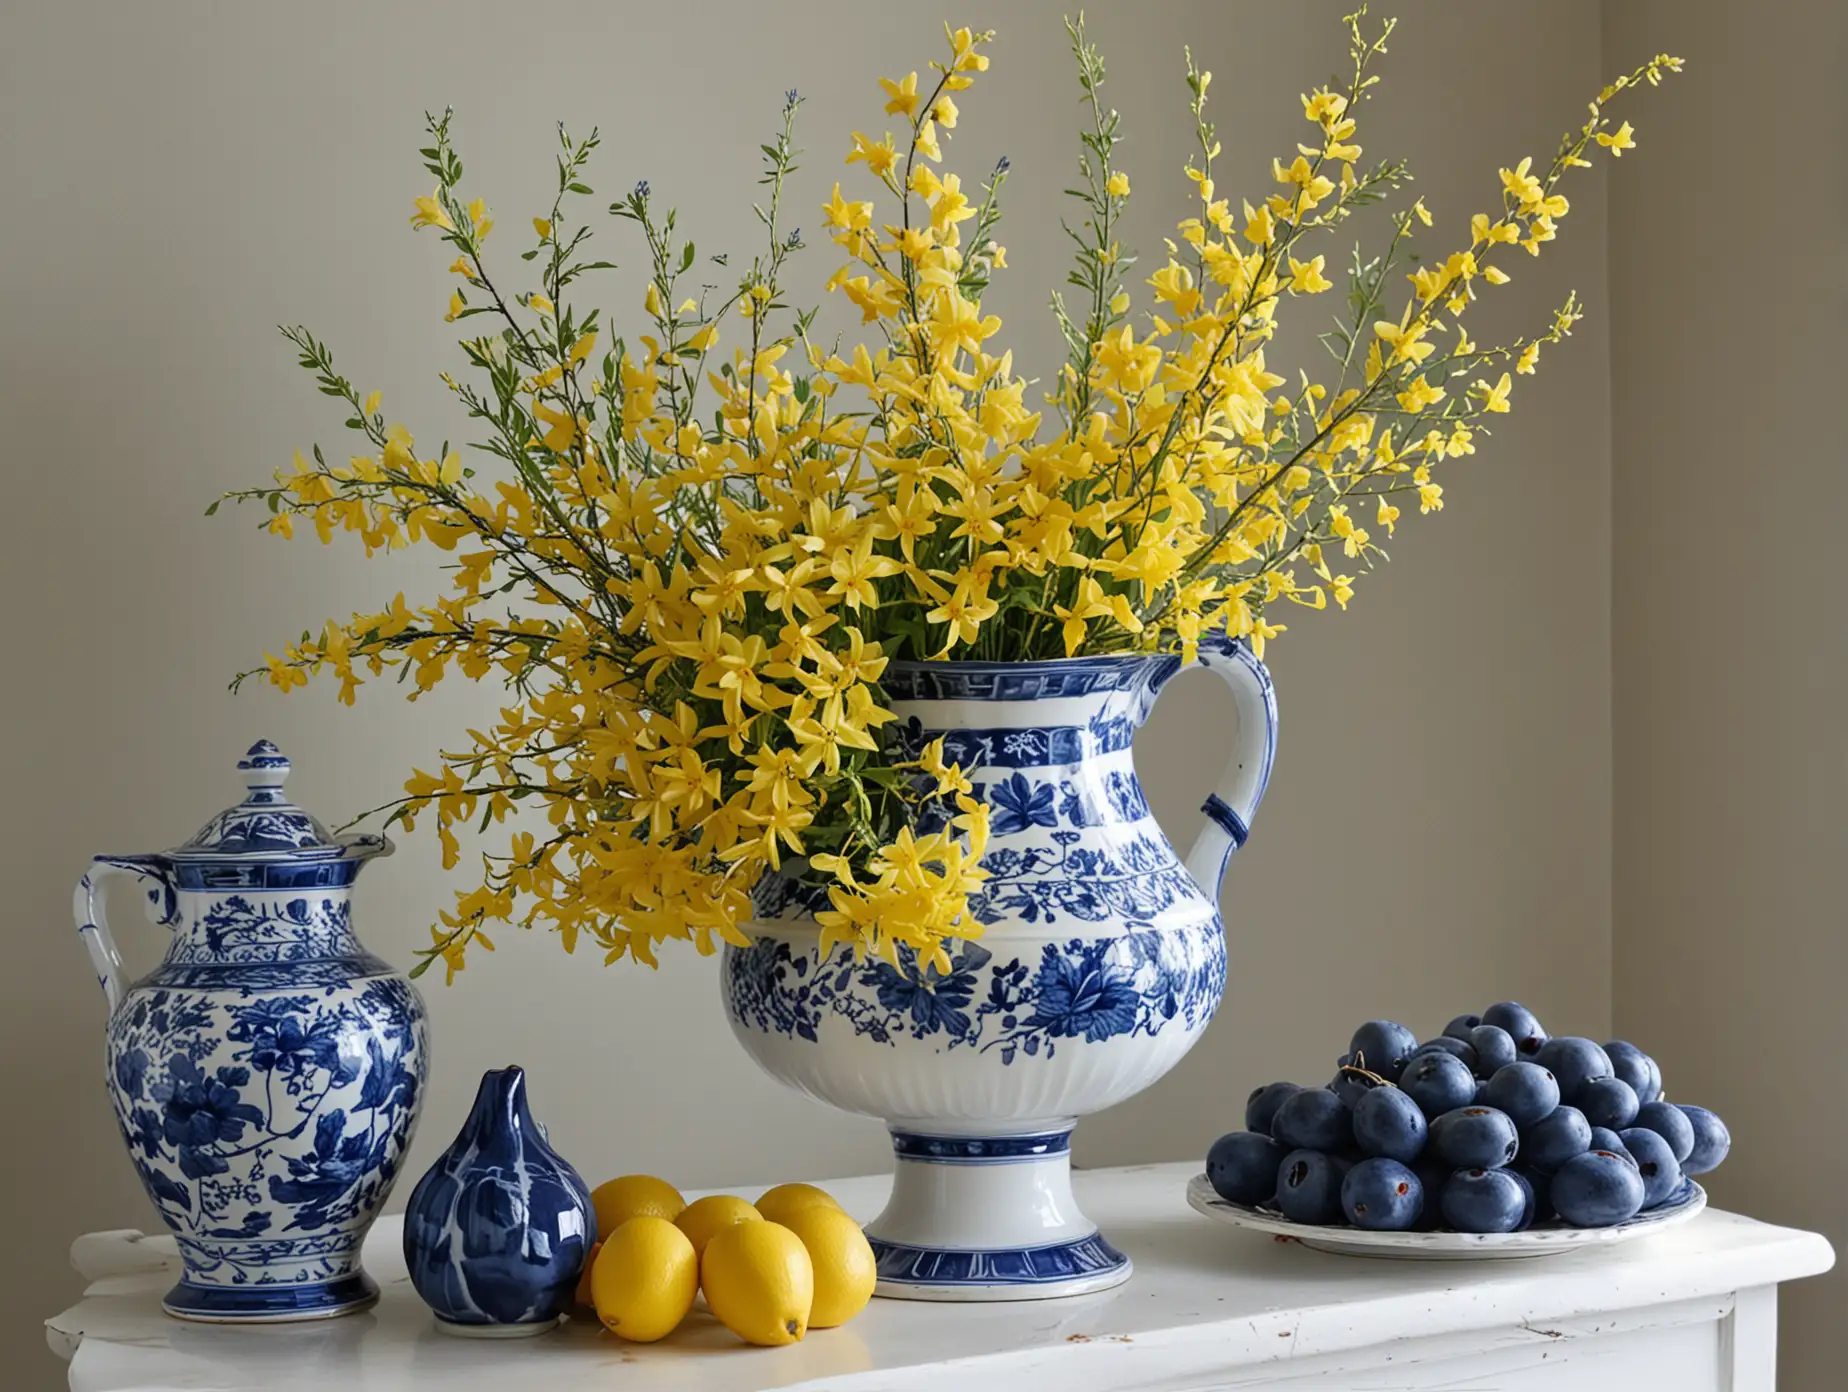 FRUIT IN A FOOTED BLUE AND WHITE COMPOTE WITH A PEDESTAL, WITH ONE BOQUET OF FORSYTHIA BRANCHES IN A BLUE AND WHITE PITCHER